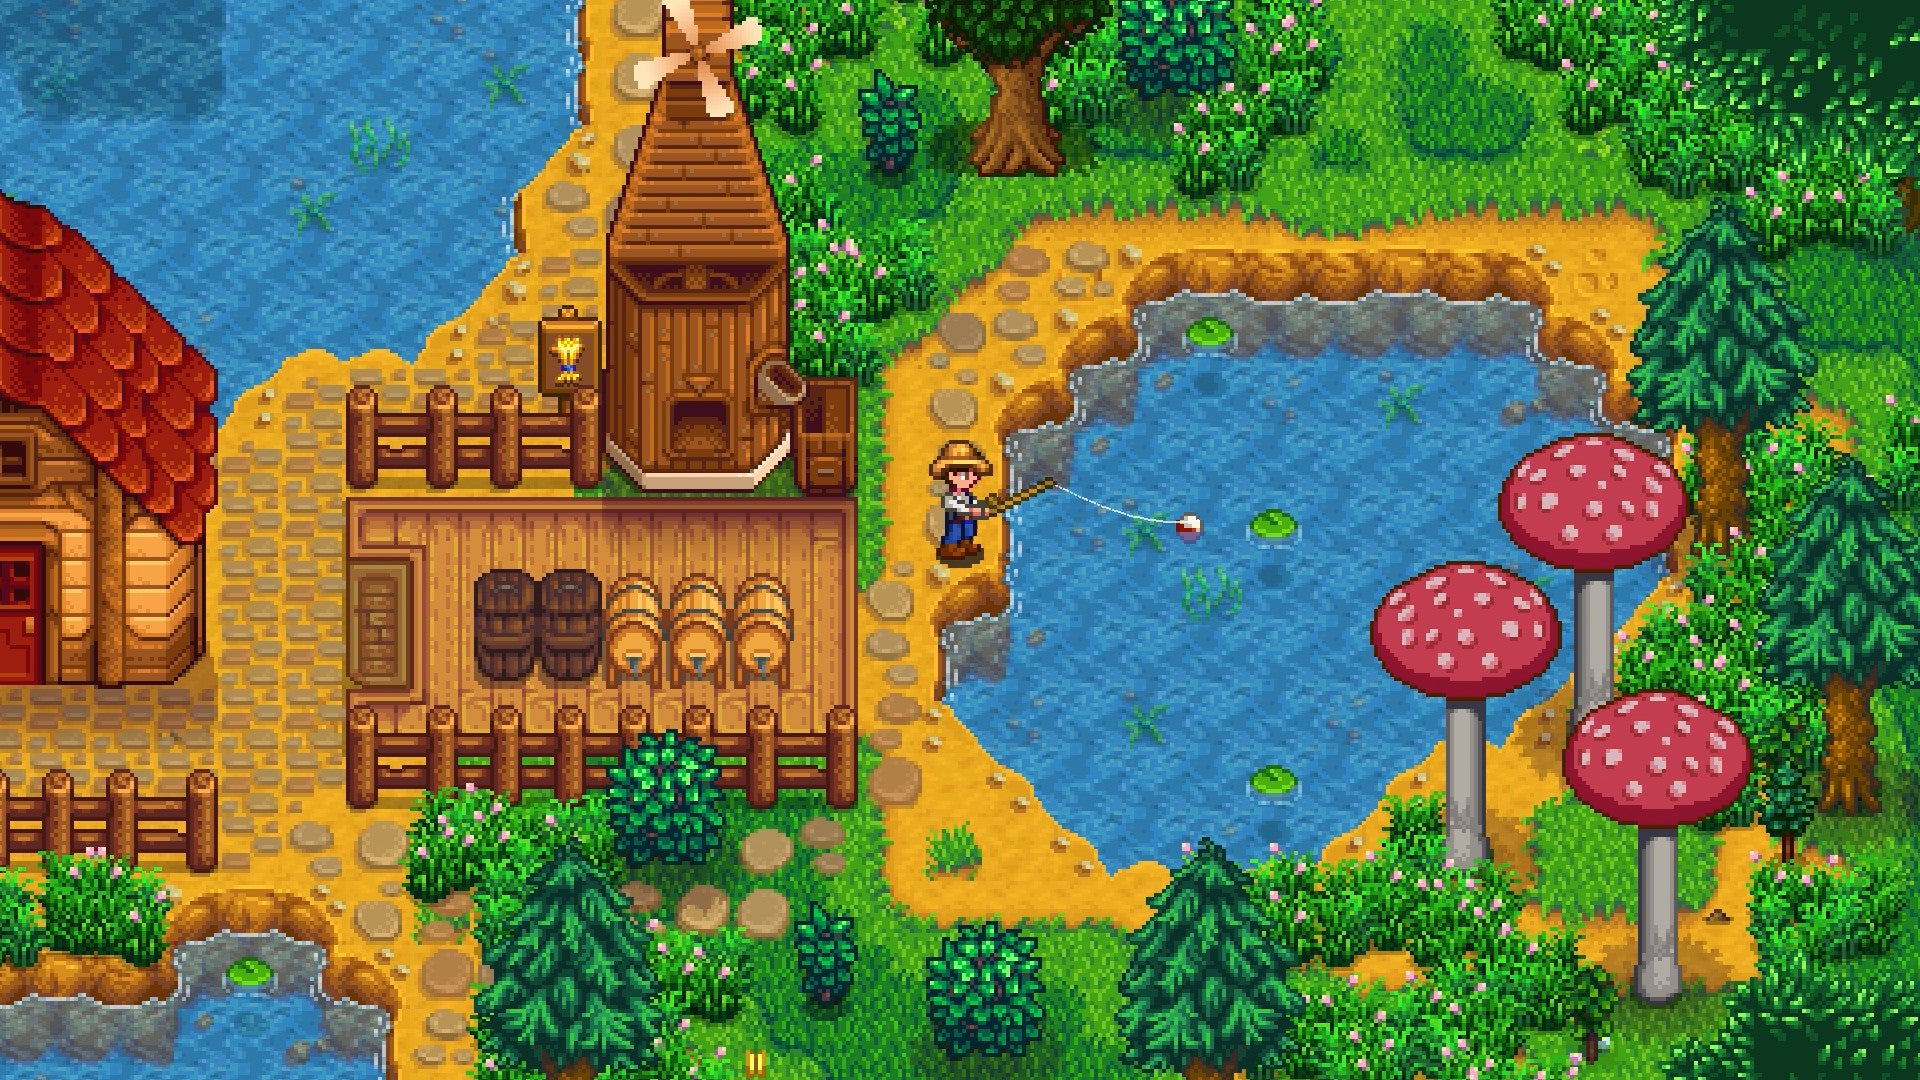 Fishing from a pond in a Stardew Valley screenshot.